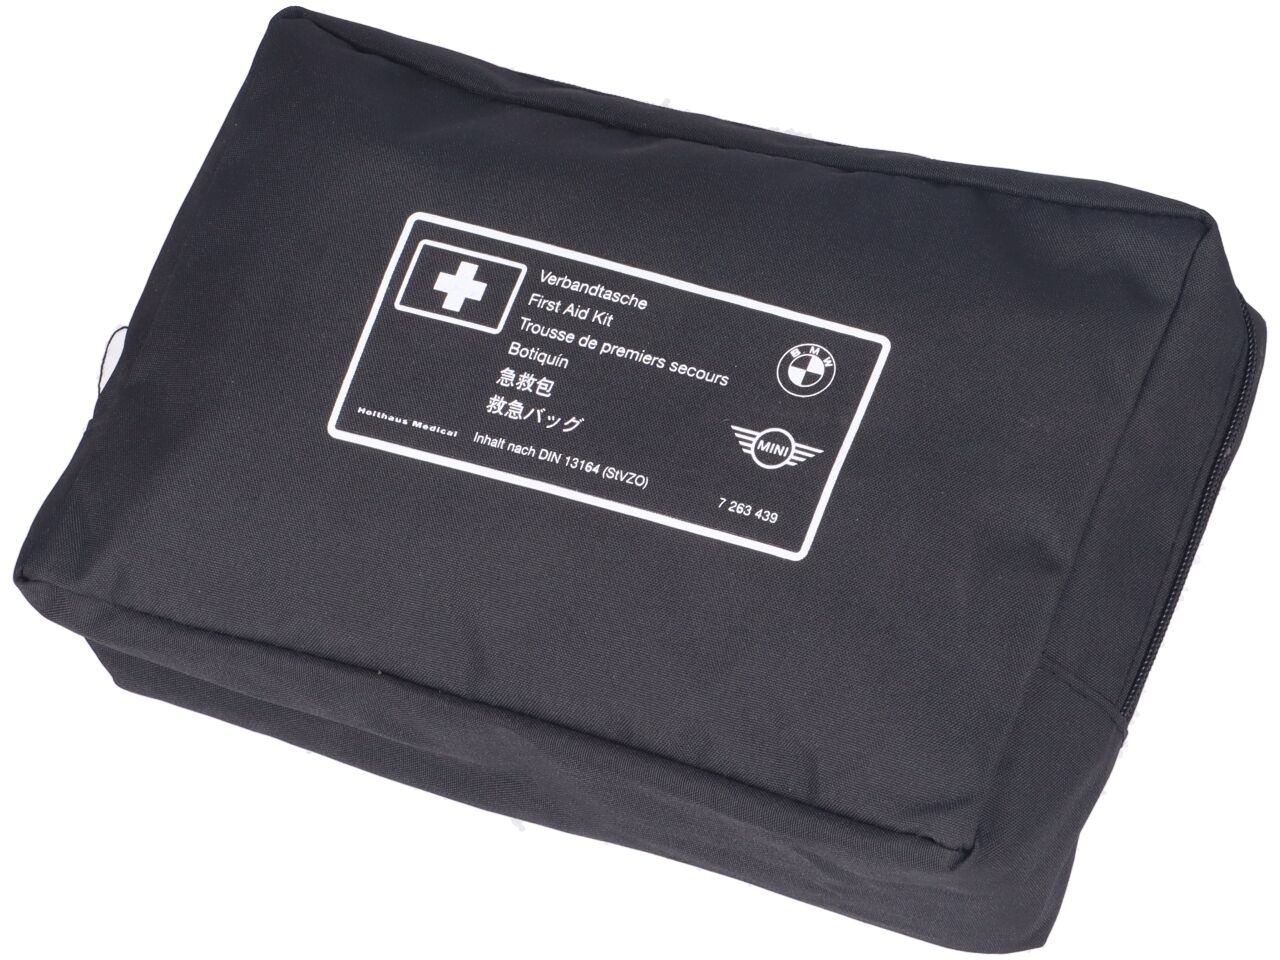 First aid kit BMW 1er (F40) 116d  85 kW  116 PS (07.2019-> )